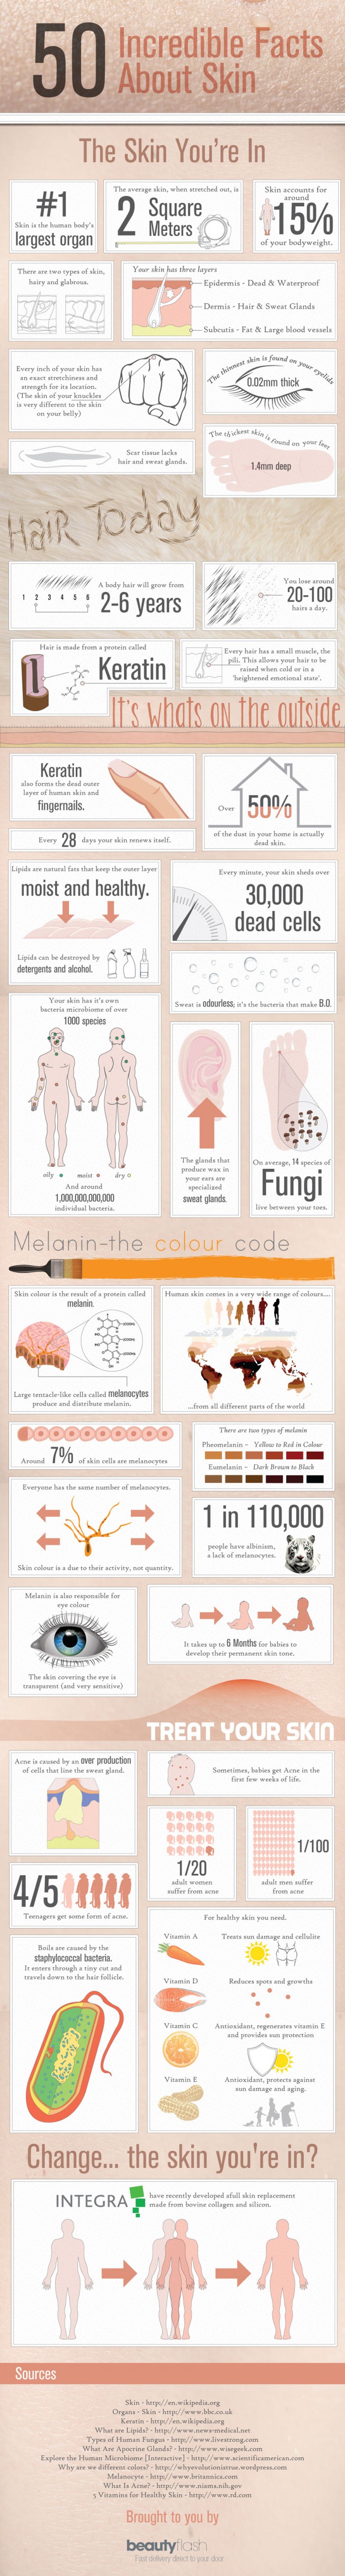 facts about skin infographic